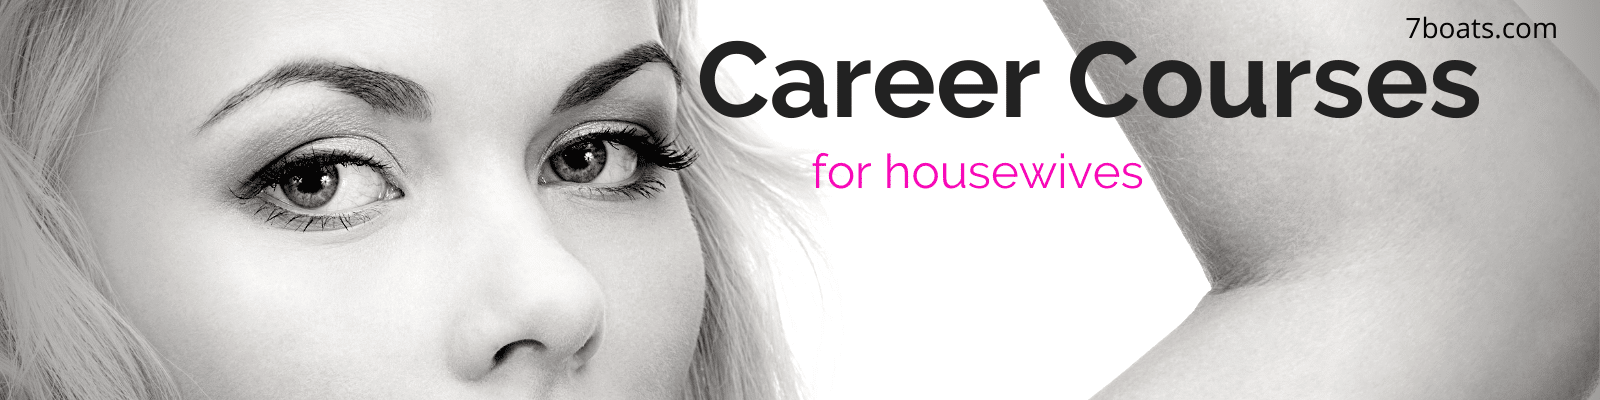 Best Career Options For Indian Housewives – Top Courses For Housewives & Stay-At-Home Moms to earn money